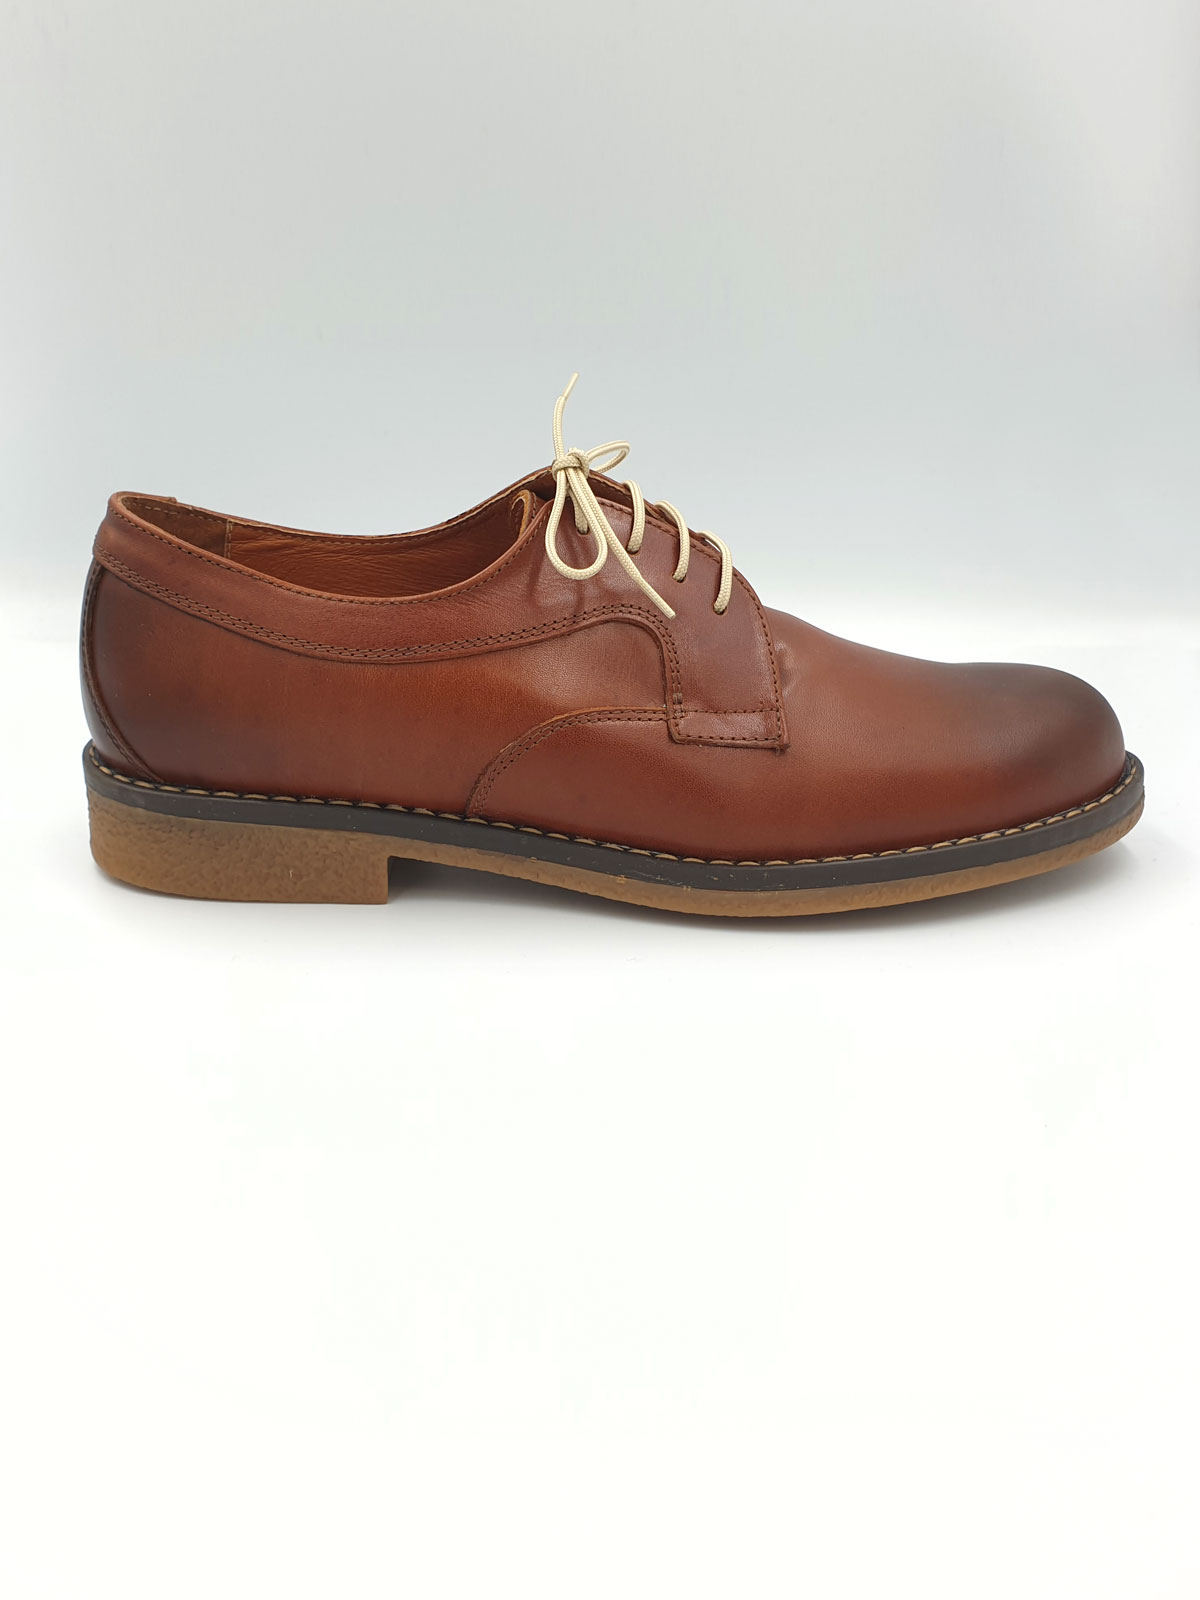  light brown shoes  - 81083 - € 72.00 img2